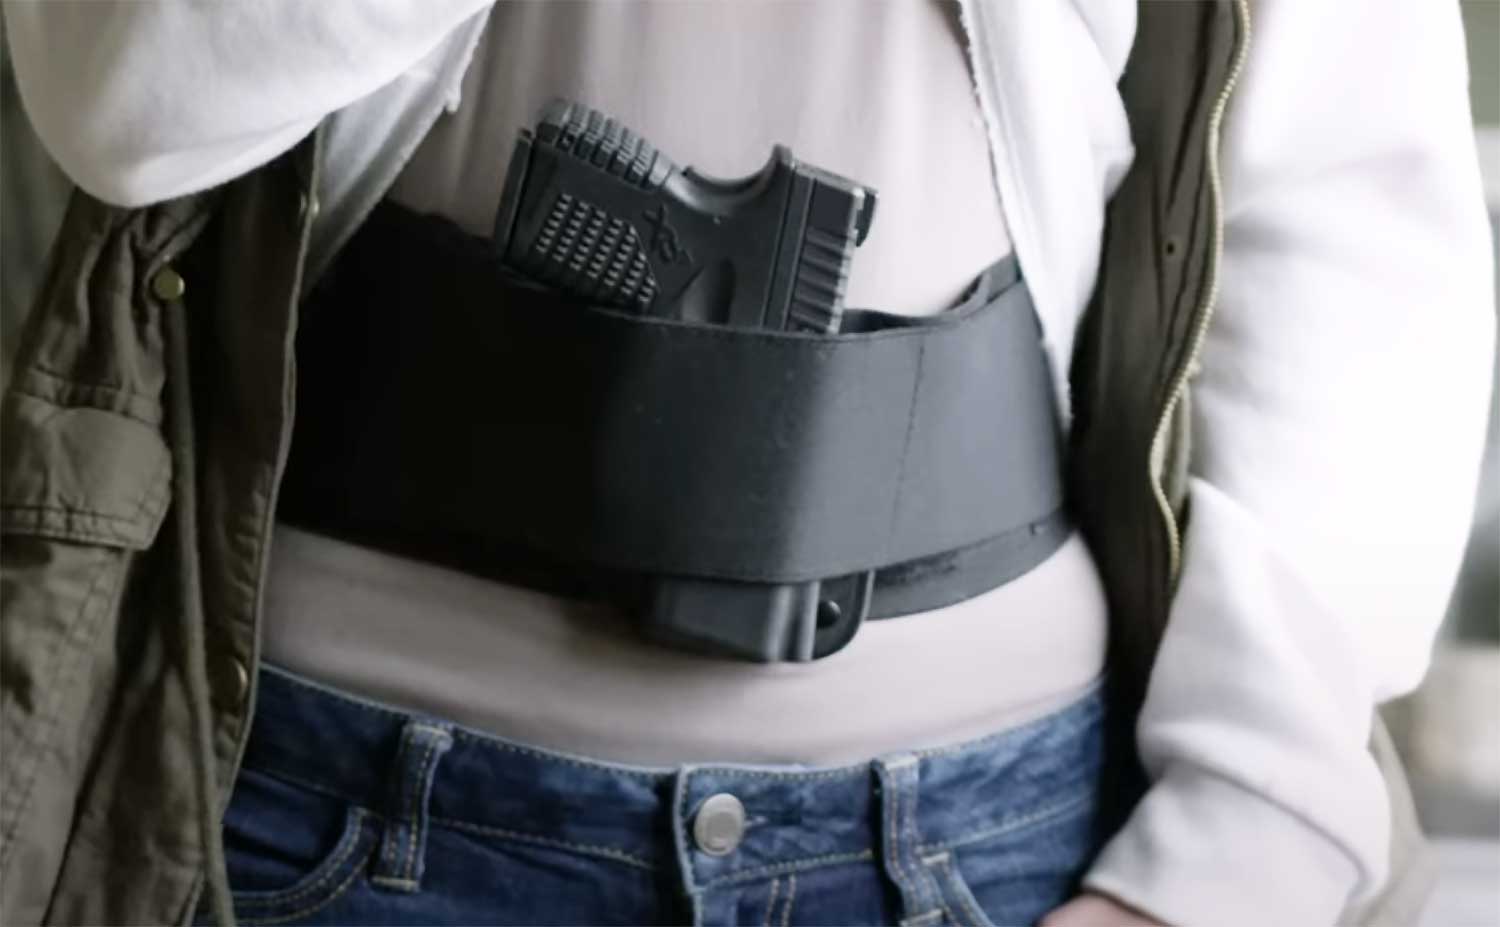 Pin on Concealed Carry Holster Reviews